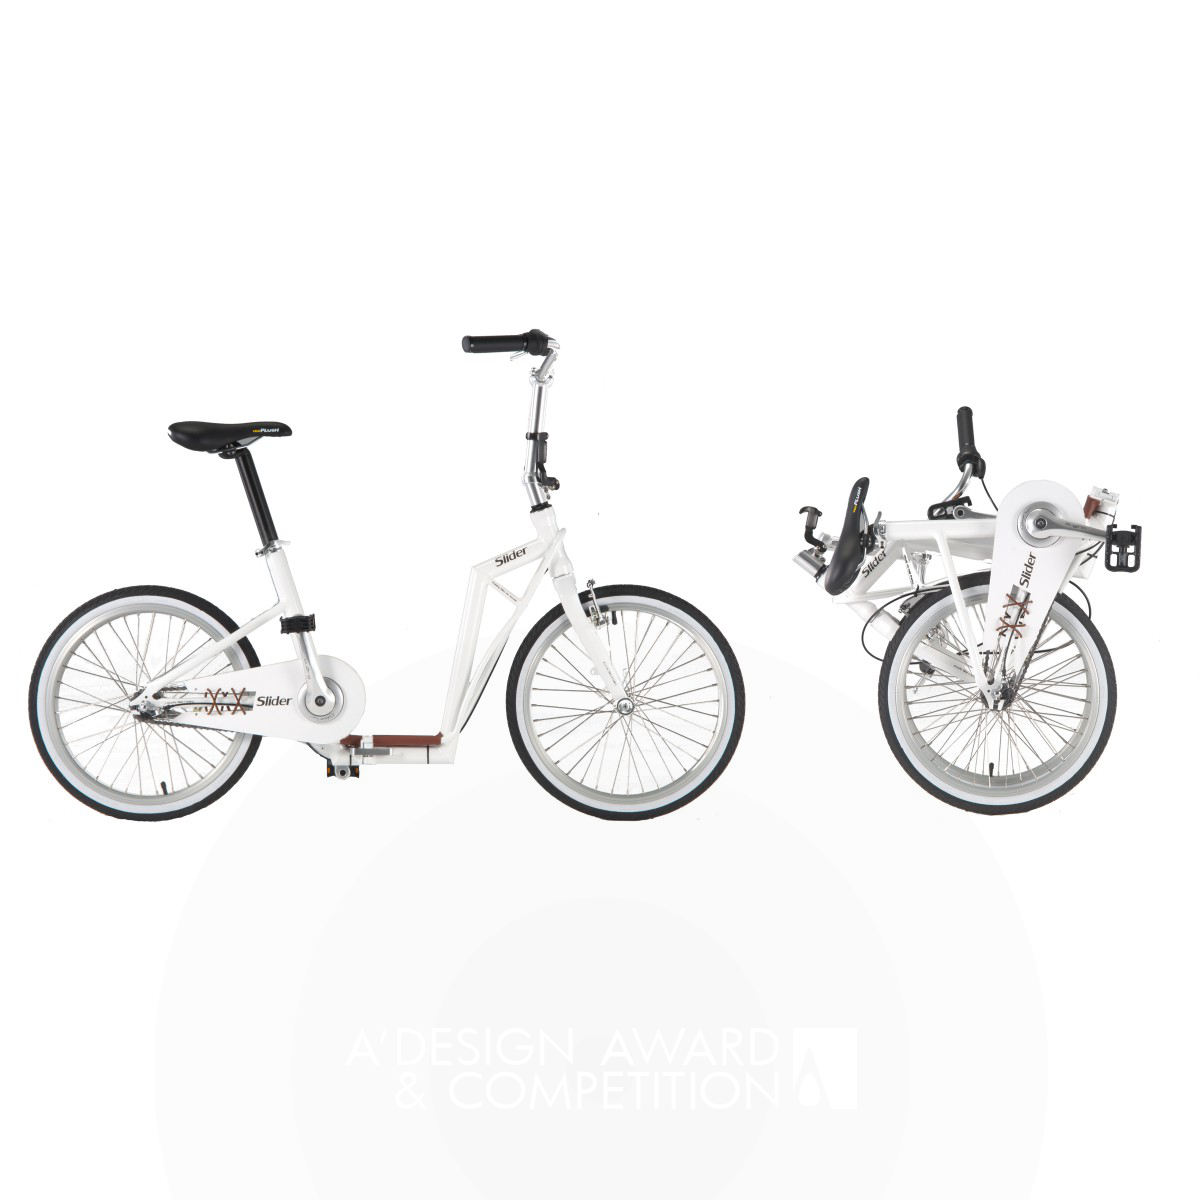 A' Design Award and Competition - Asbjoerk Stanly Mogensen Mini Bike  Electric Bicycle